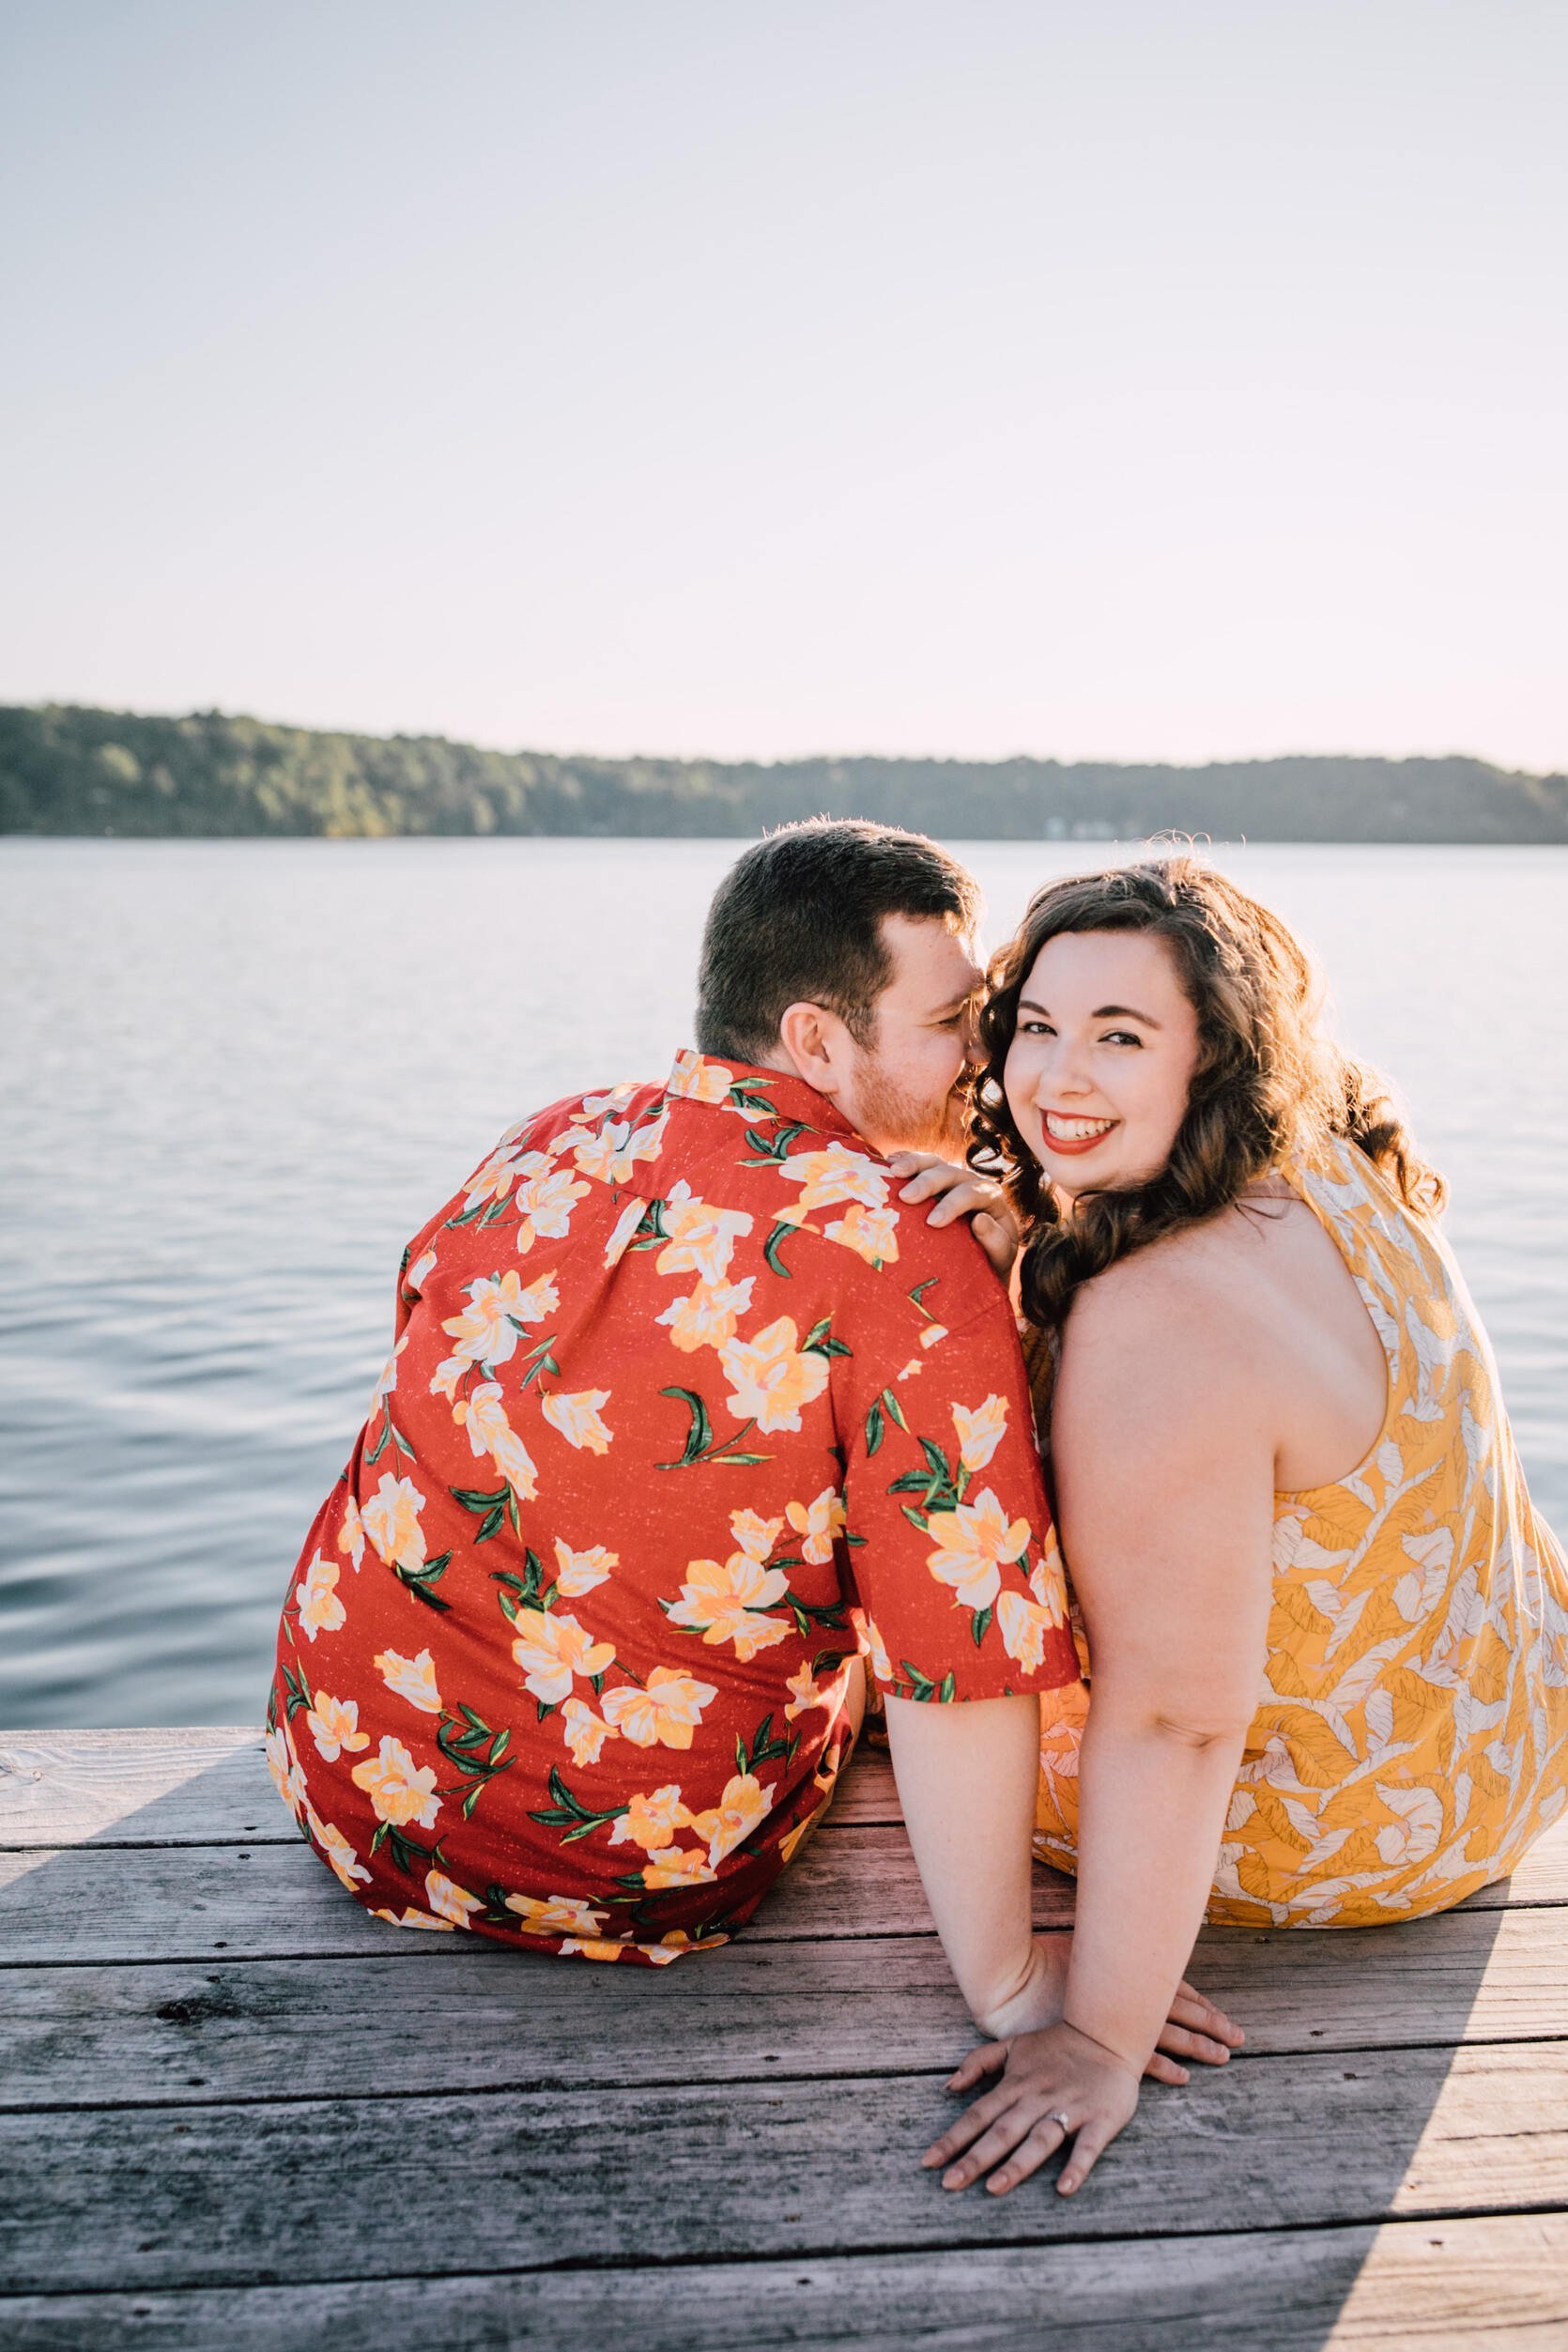  Hanna looks over her shoulder while her fiancé snuggles in on a dock in from of Lake Ontario for their sunset engagement photos 